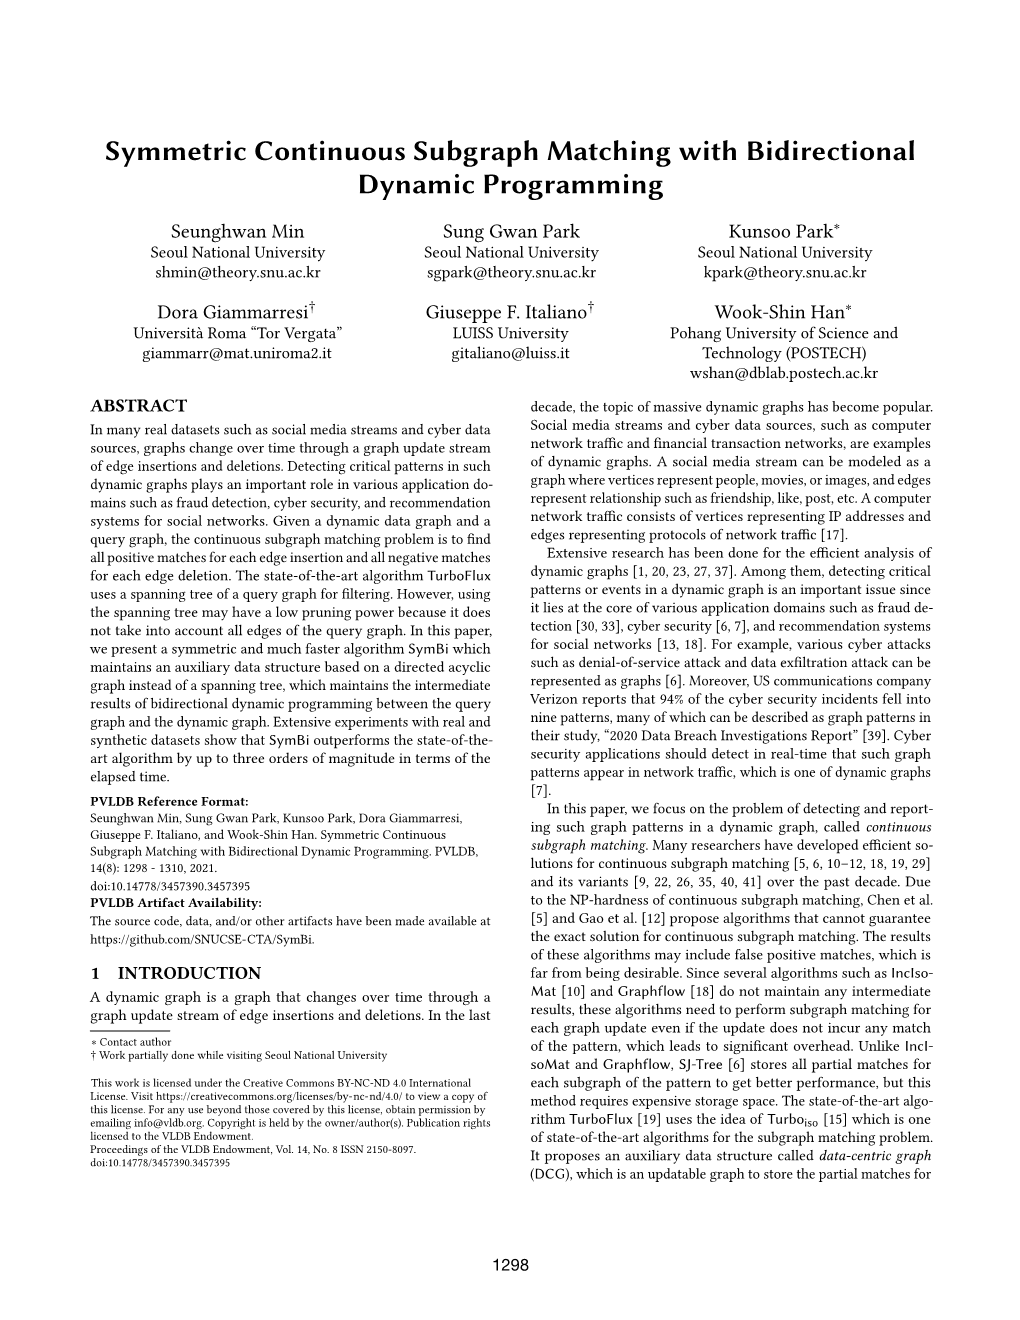 Symmetric Continuous Subgraph Matching with Bidirectional Dynamic Programming